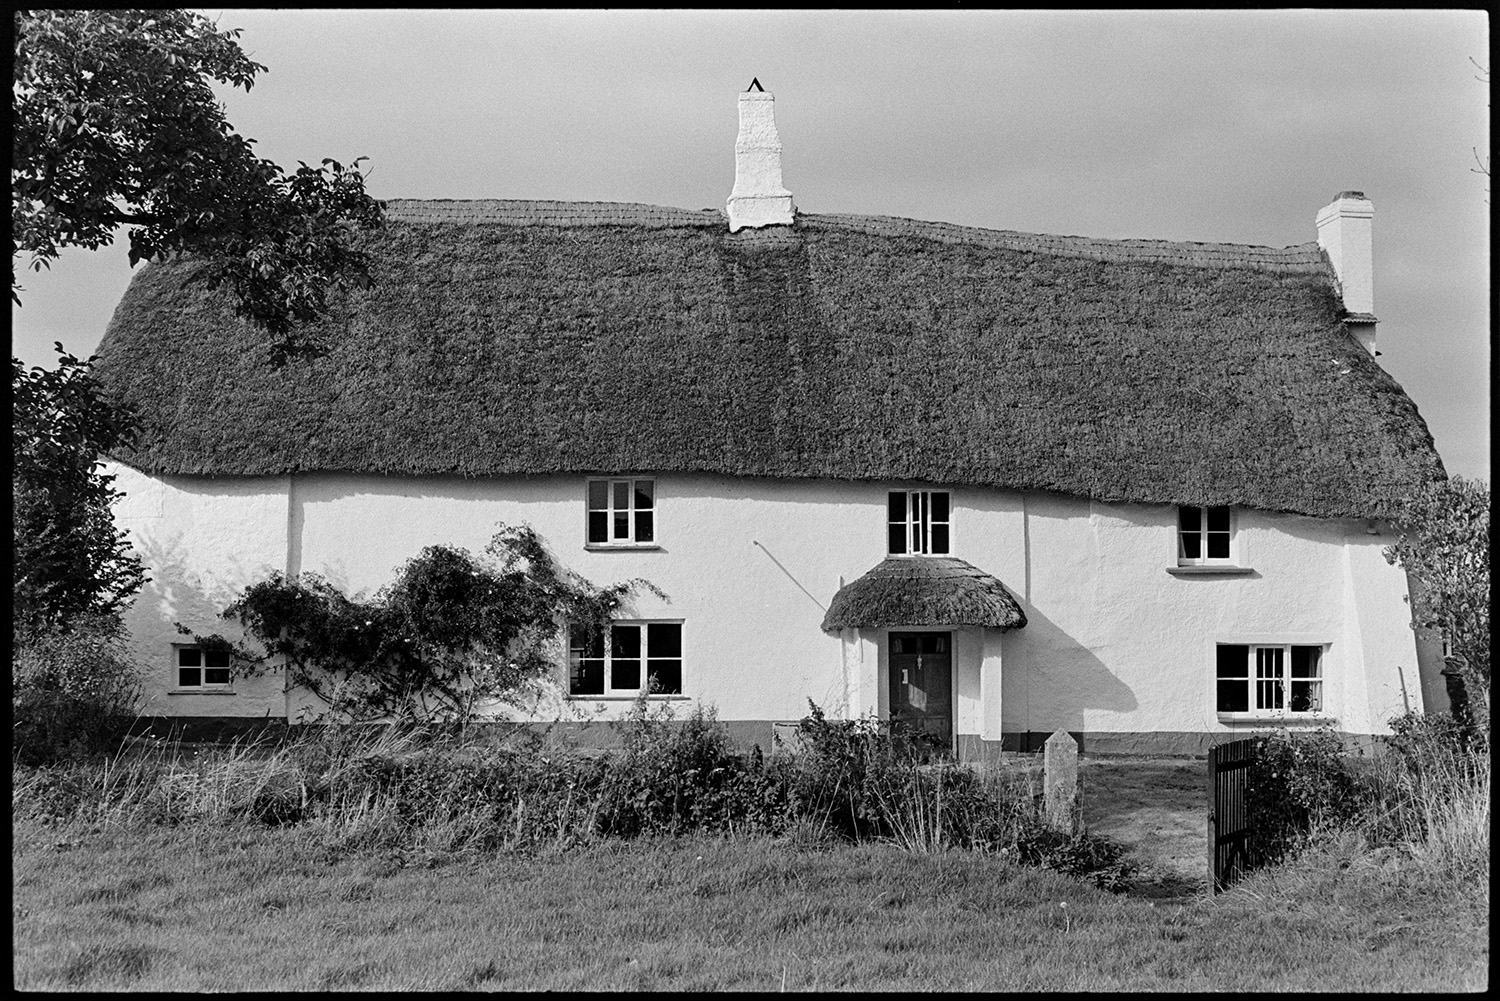 Farmhouse used as creative writing centre. 
[The Arvon Centre at Totleigh Barton, Sheepwash. The thatched farmhouse has a thatched porch and a plant growing up the wall. The farmhouse was used as a creative writing centre.]